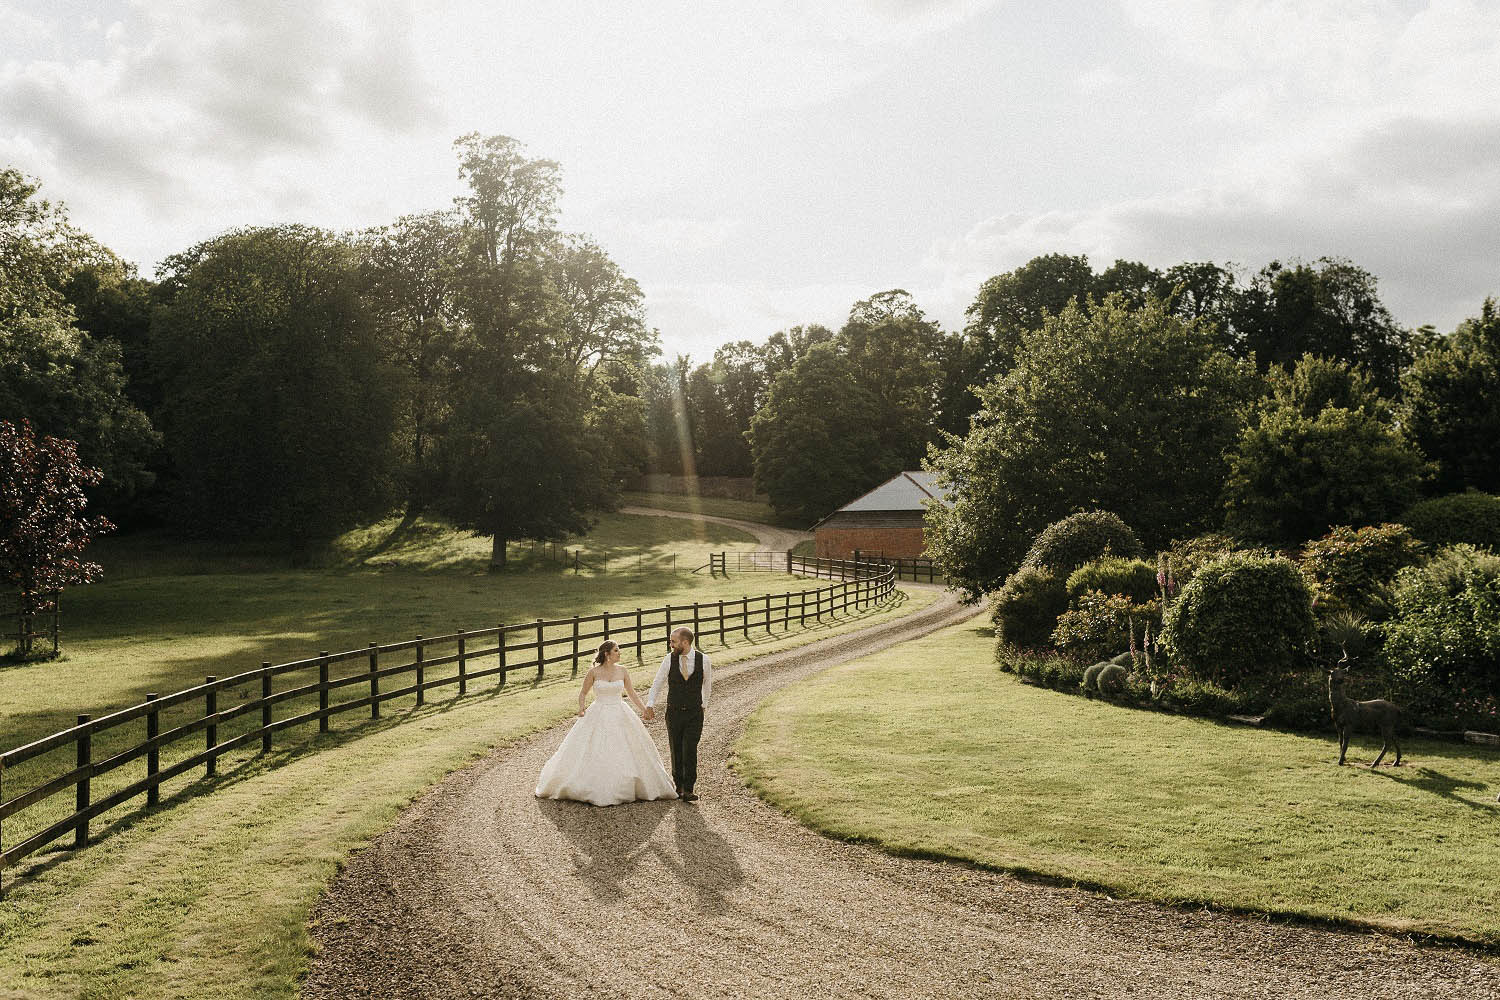 A bride and groom walk down a curving driveway at The Manor Estate Wiltshire